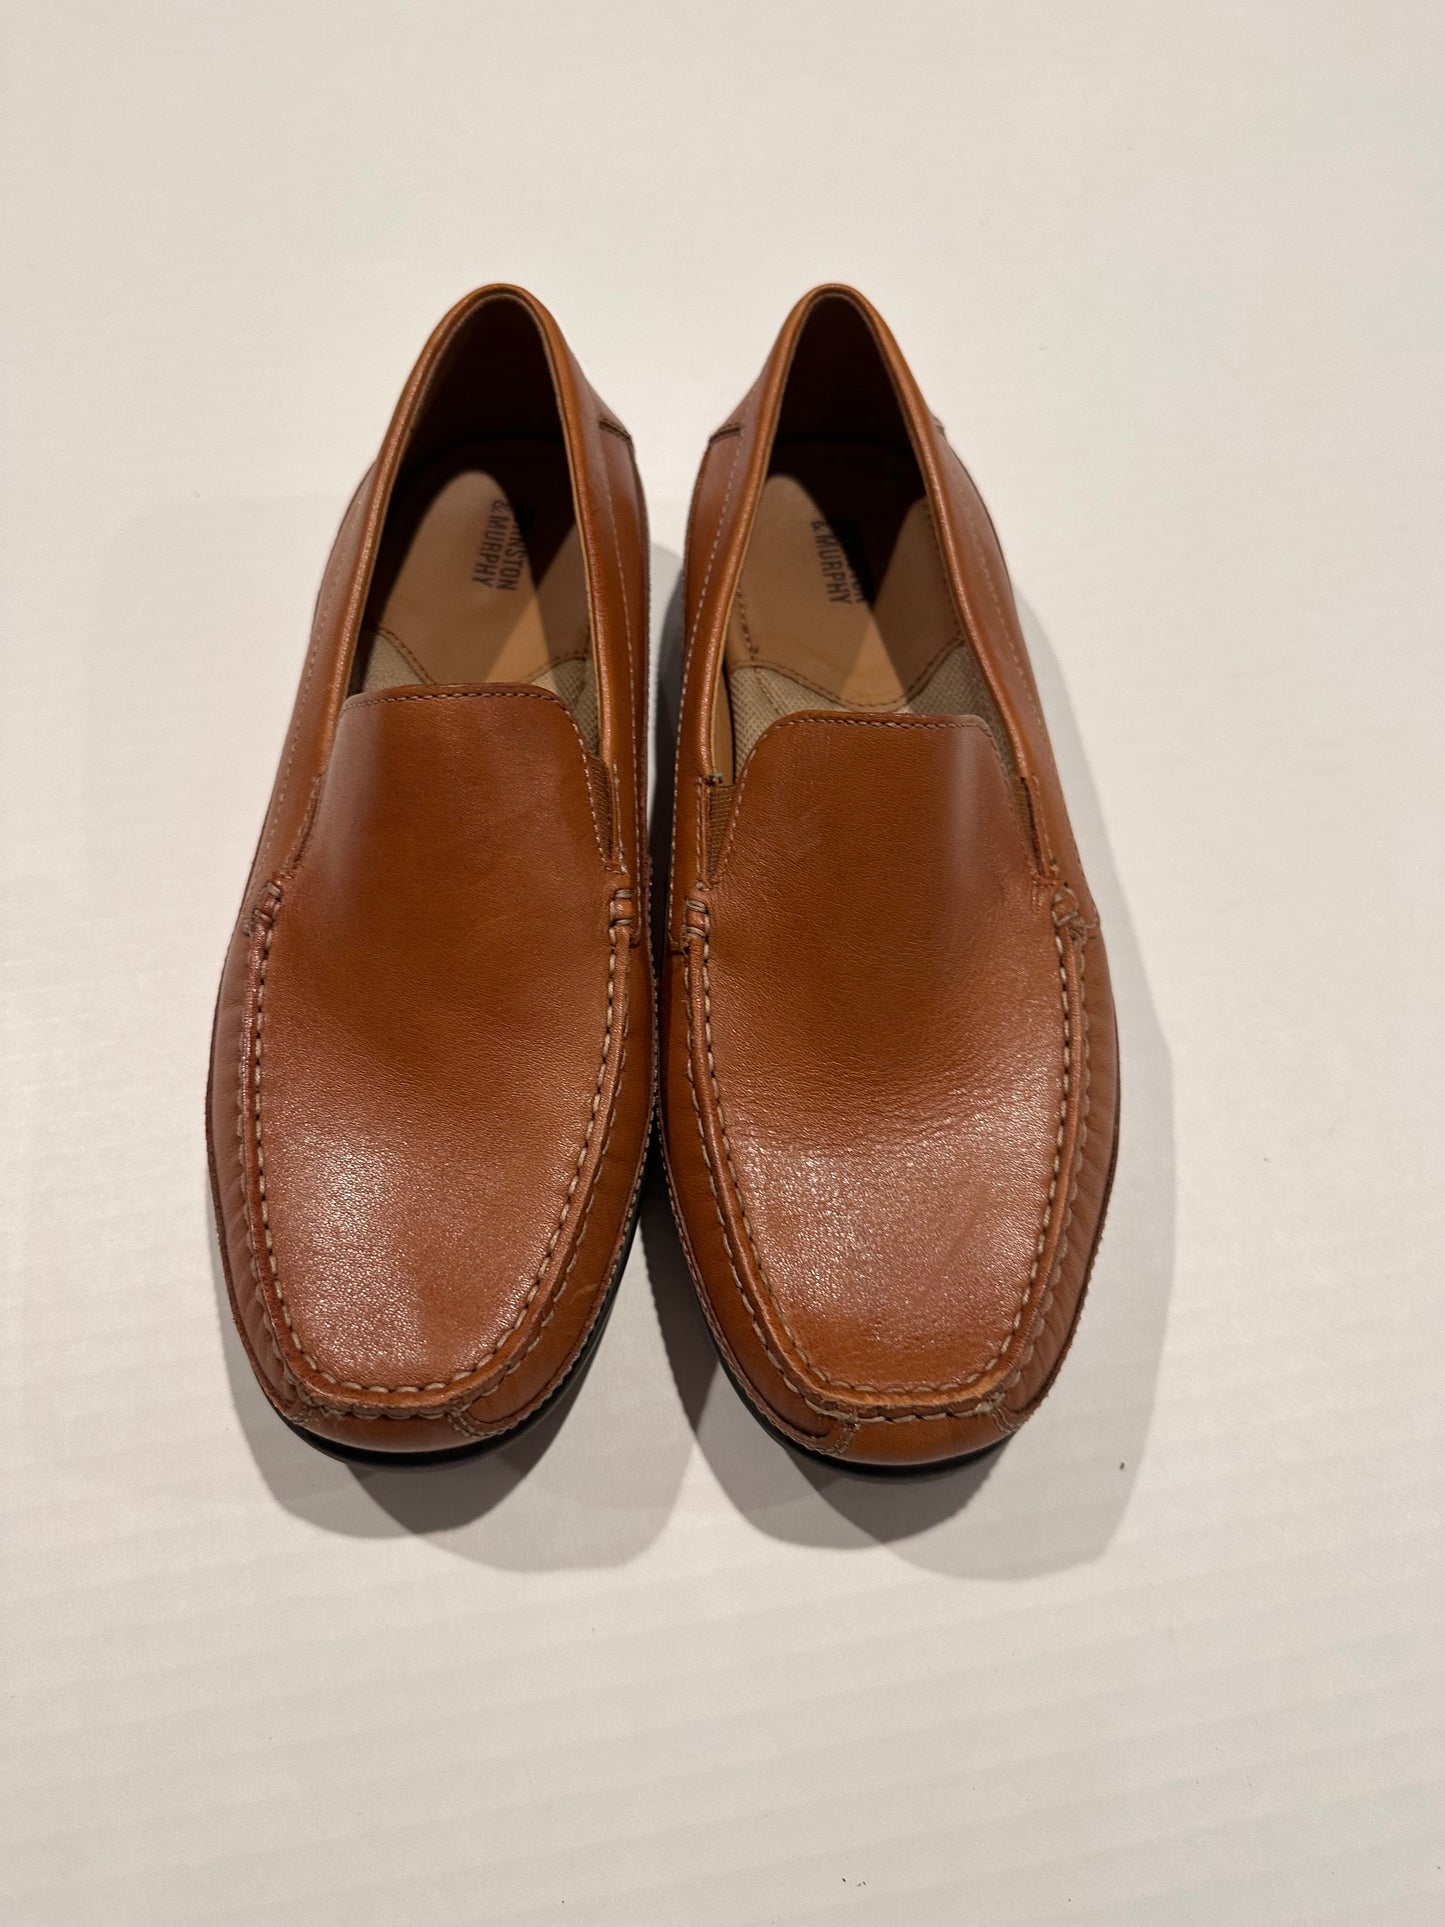 Johnston and Murphy boys size 7, brown leather